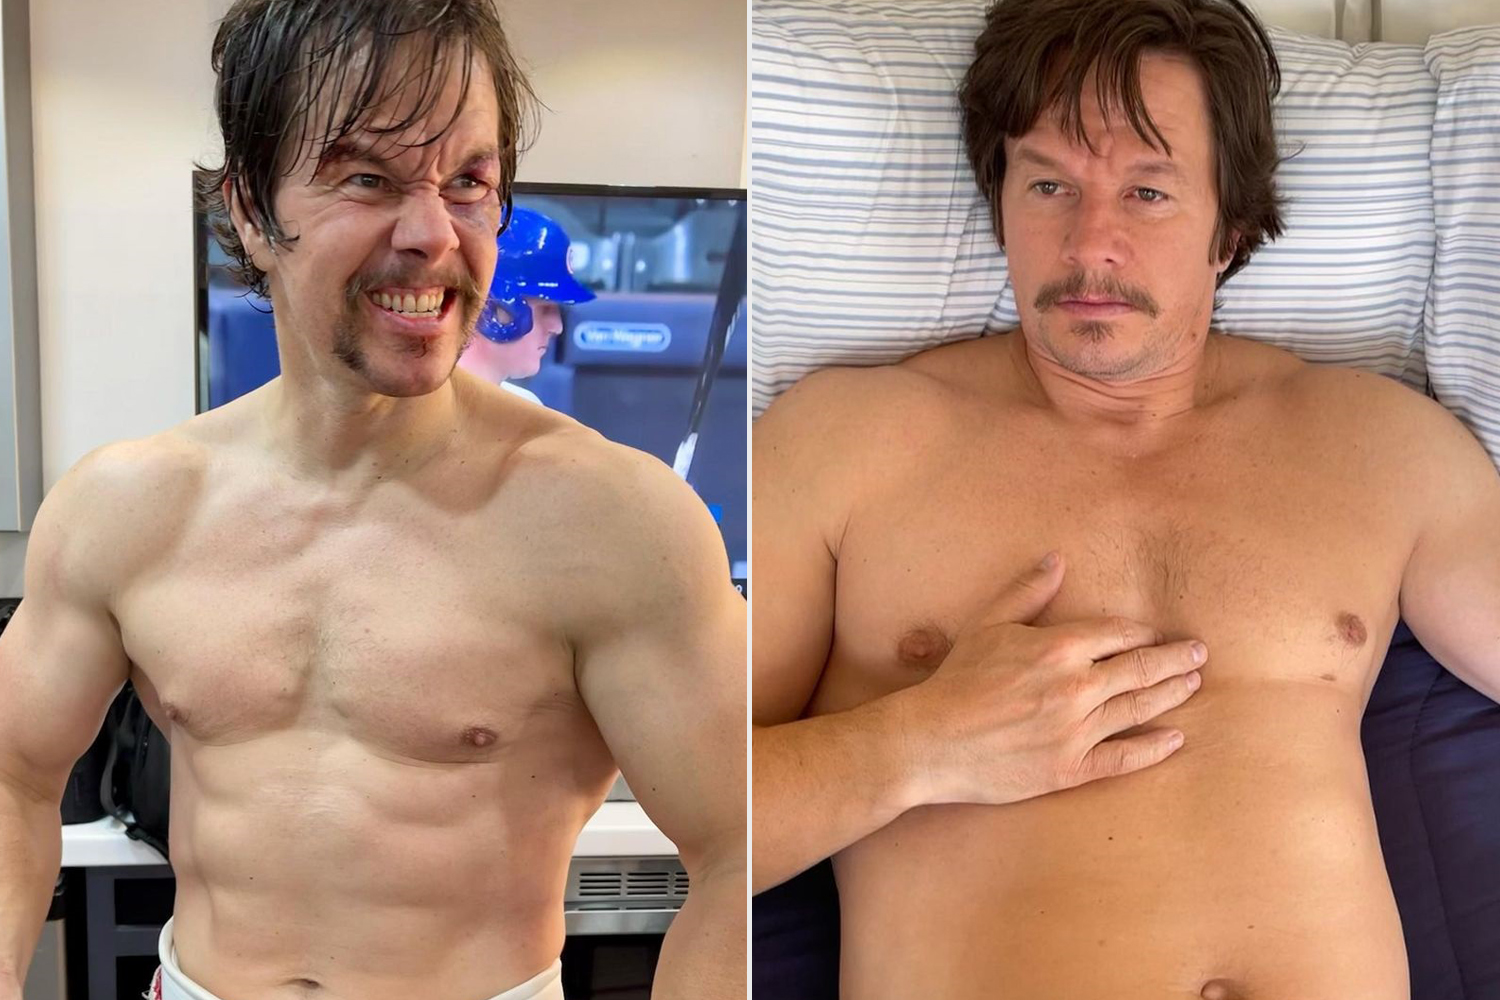 https://www.instagram.com/p/CObTGQcrqb3/
markwahlberg
Verified
From left photo 3 weeks ago to this, now. Thanks to @chef_lawrence_d cooking.
Credit: Mark Wahlberg Instagram